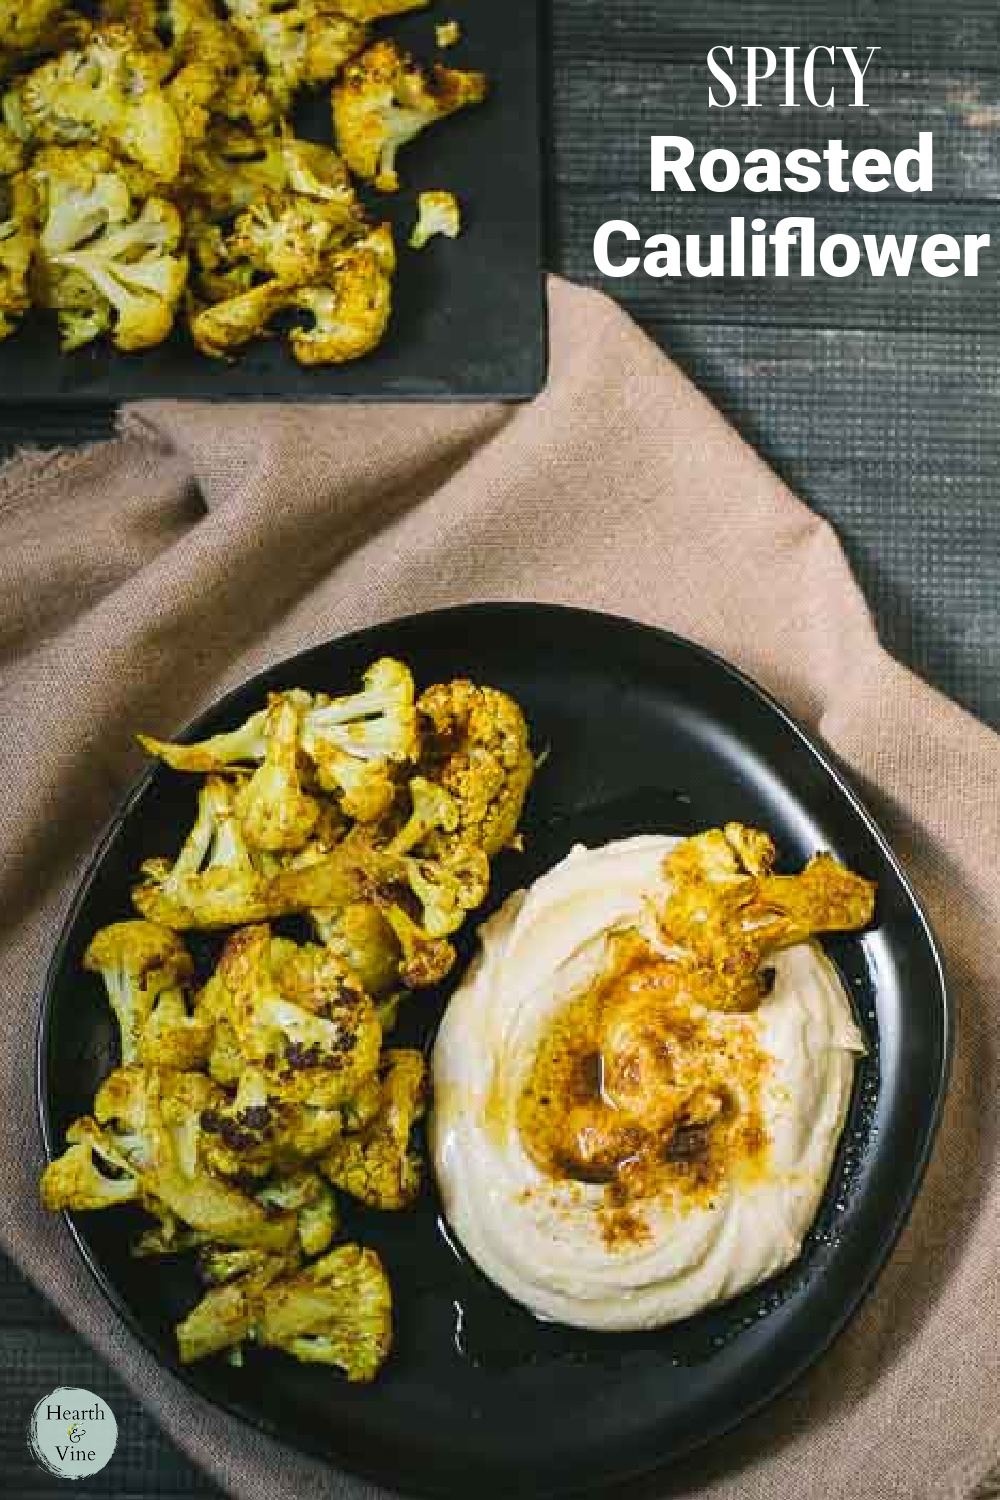 A plate of roasted cauliflower next to some hummus with spicy seasonings on both.